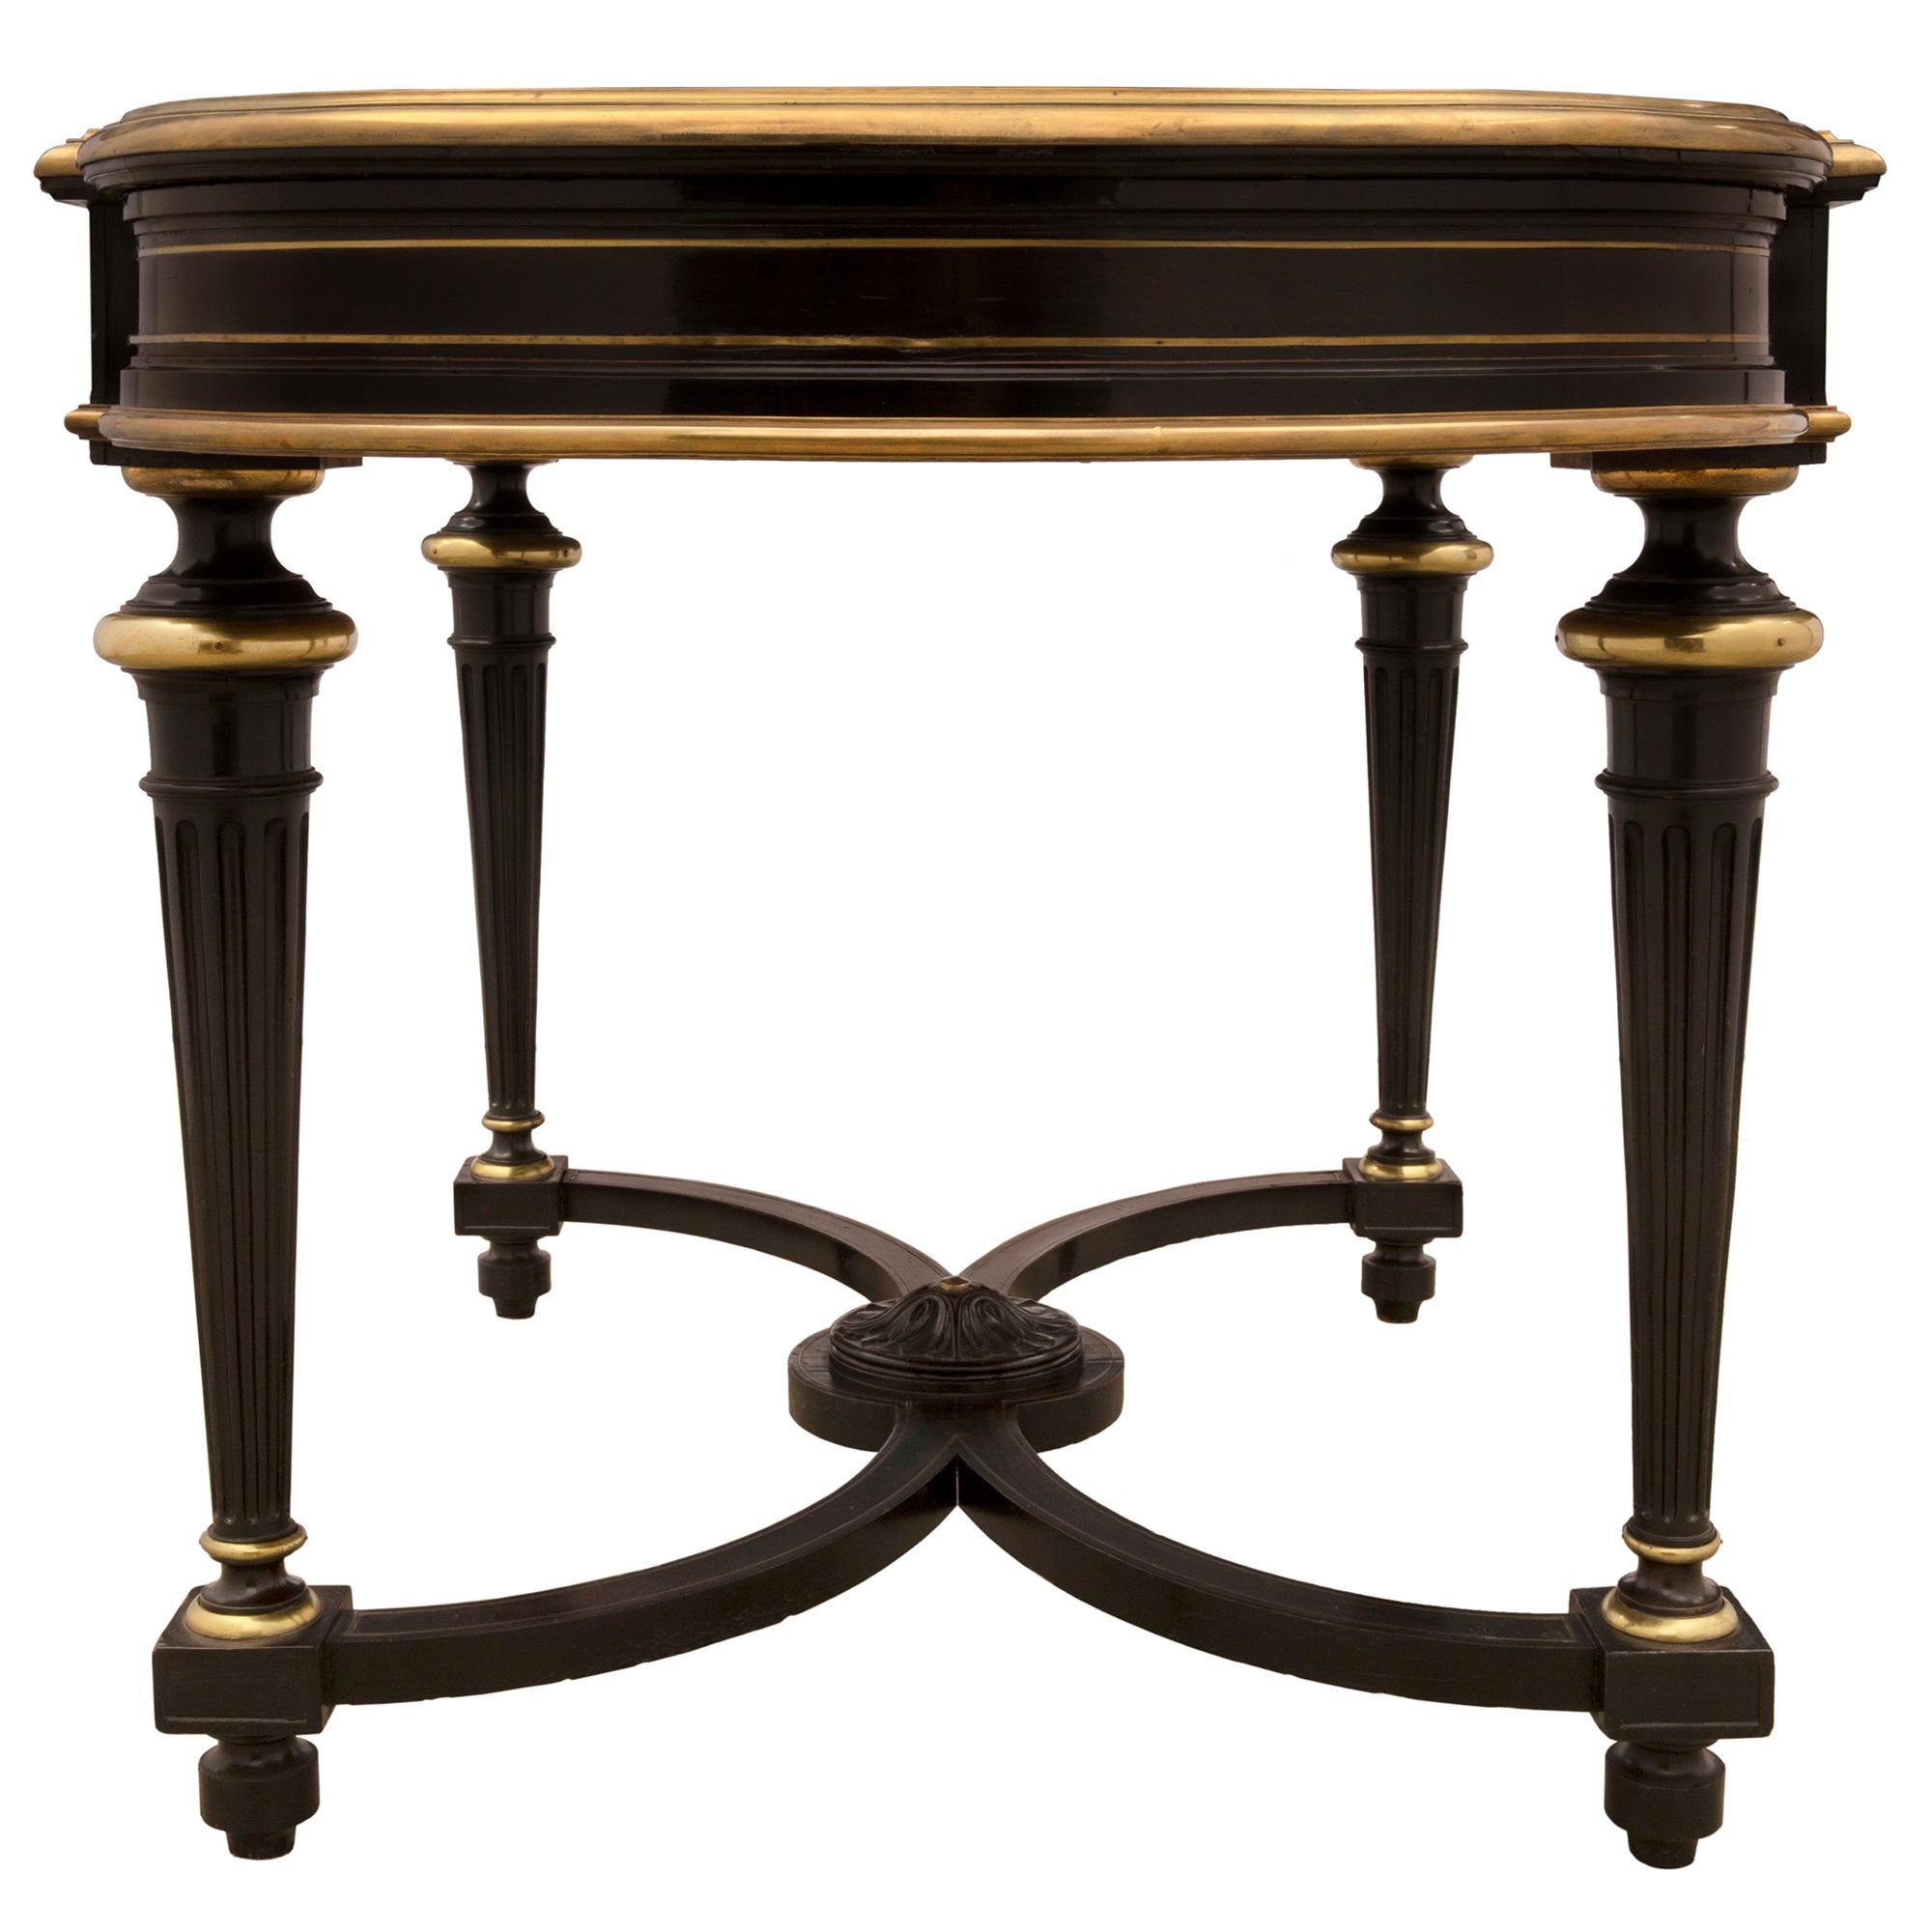 French 19th Century Napoleon III Period Ebony and Brass Inlaid Desk In Good Condition For Sale In West Palm Beach, FL